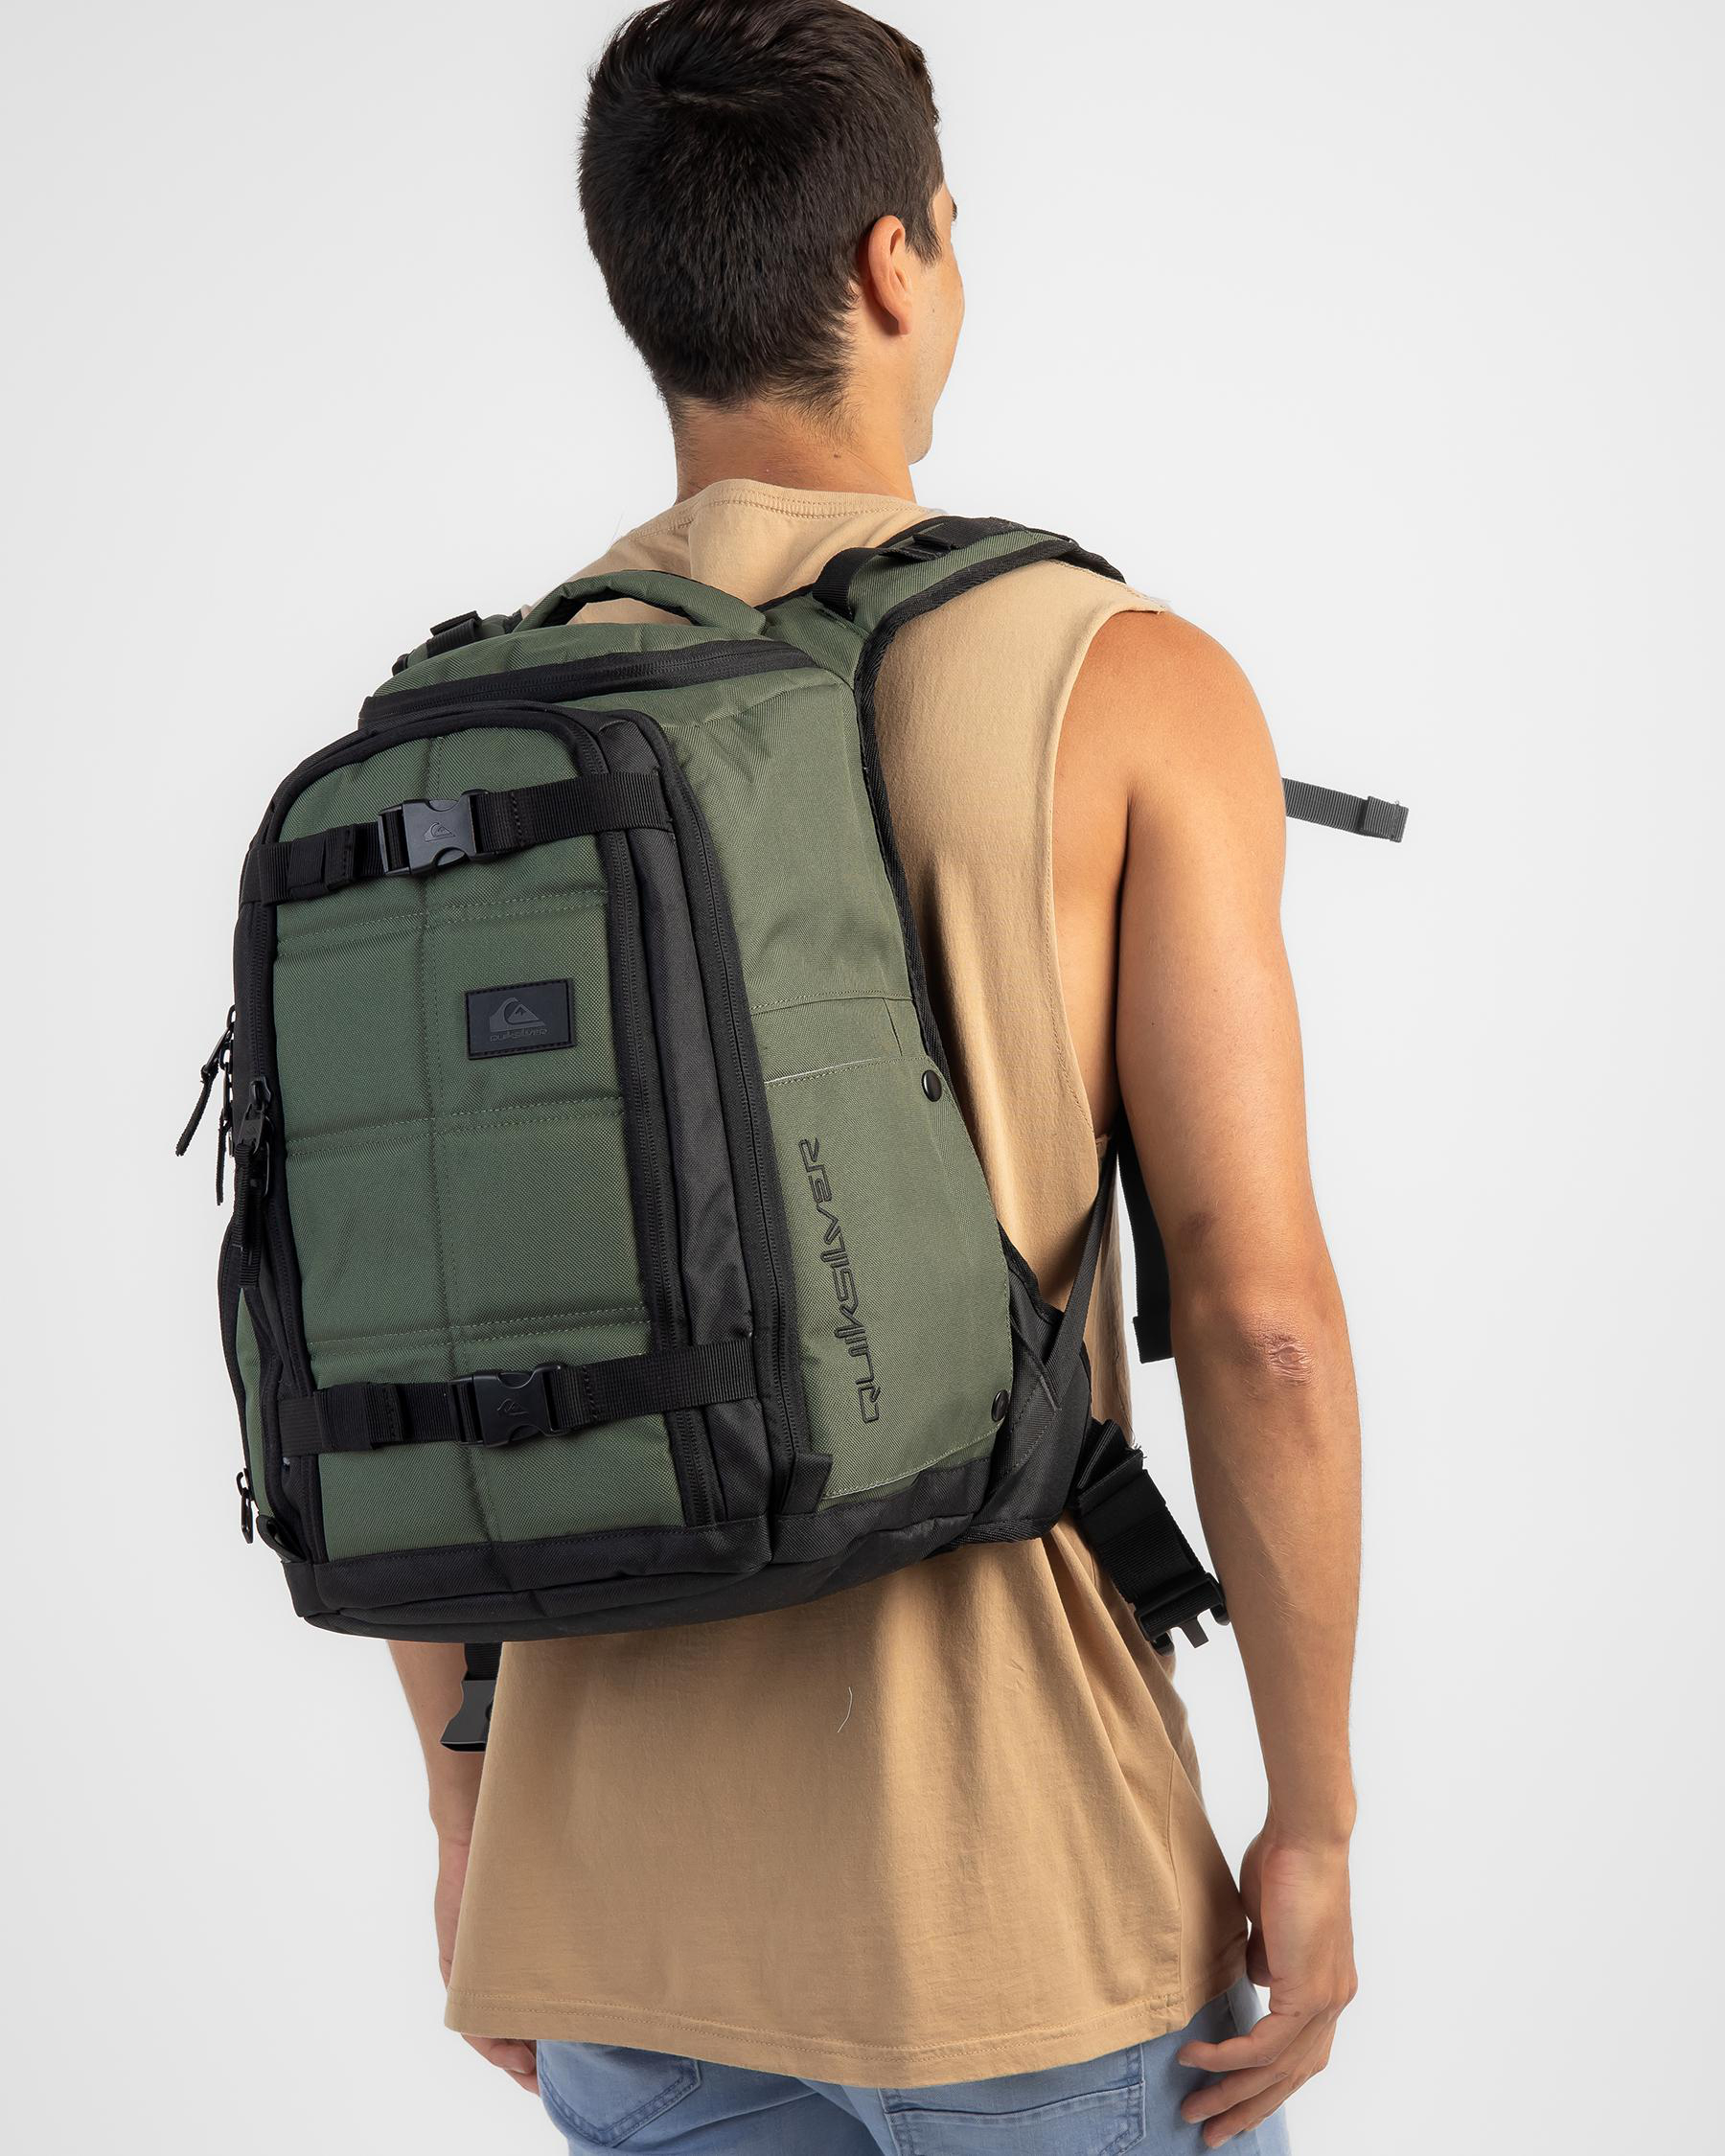 Quiksilver Grenade Backpack In Thyme - FREE* Shipping & Easy Returns ...